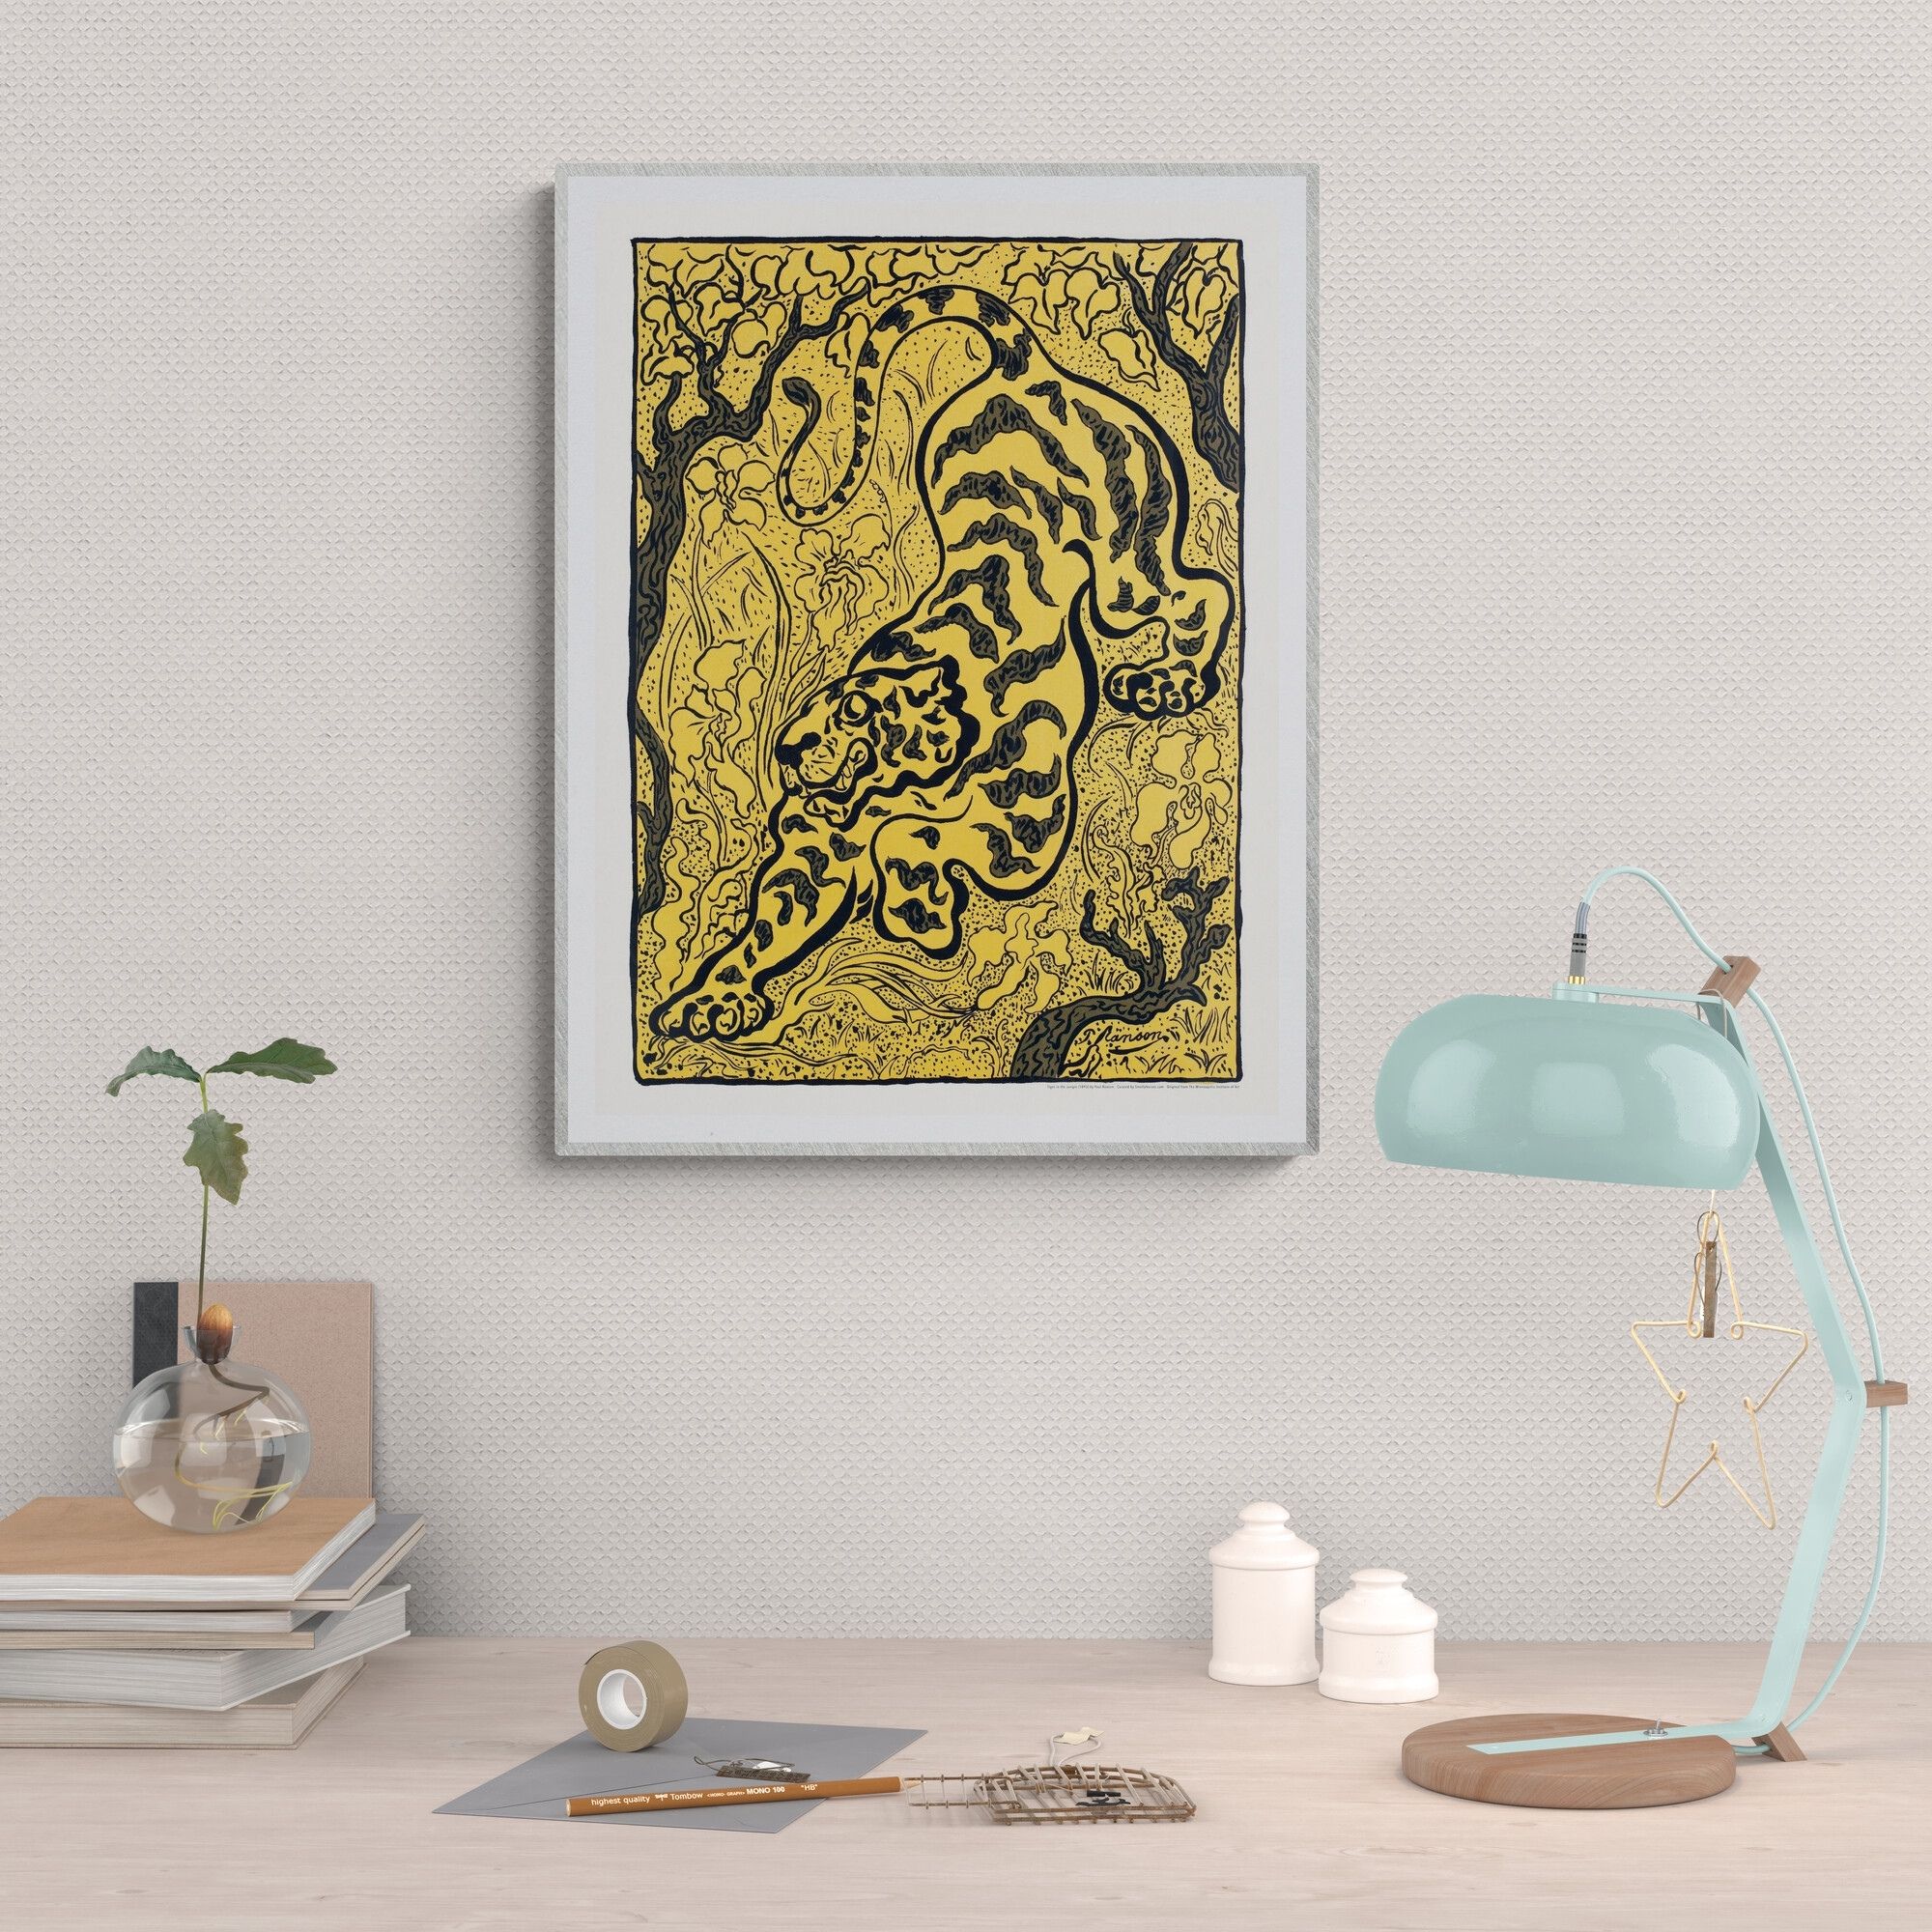 Stylized black and gold Art Nouveau poster of a tiger in a jungle with intricate tree and leaf patterns, by Paul Ranson, evoking a dynamic and exotic atmosphere.